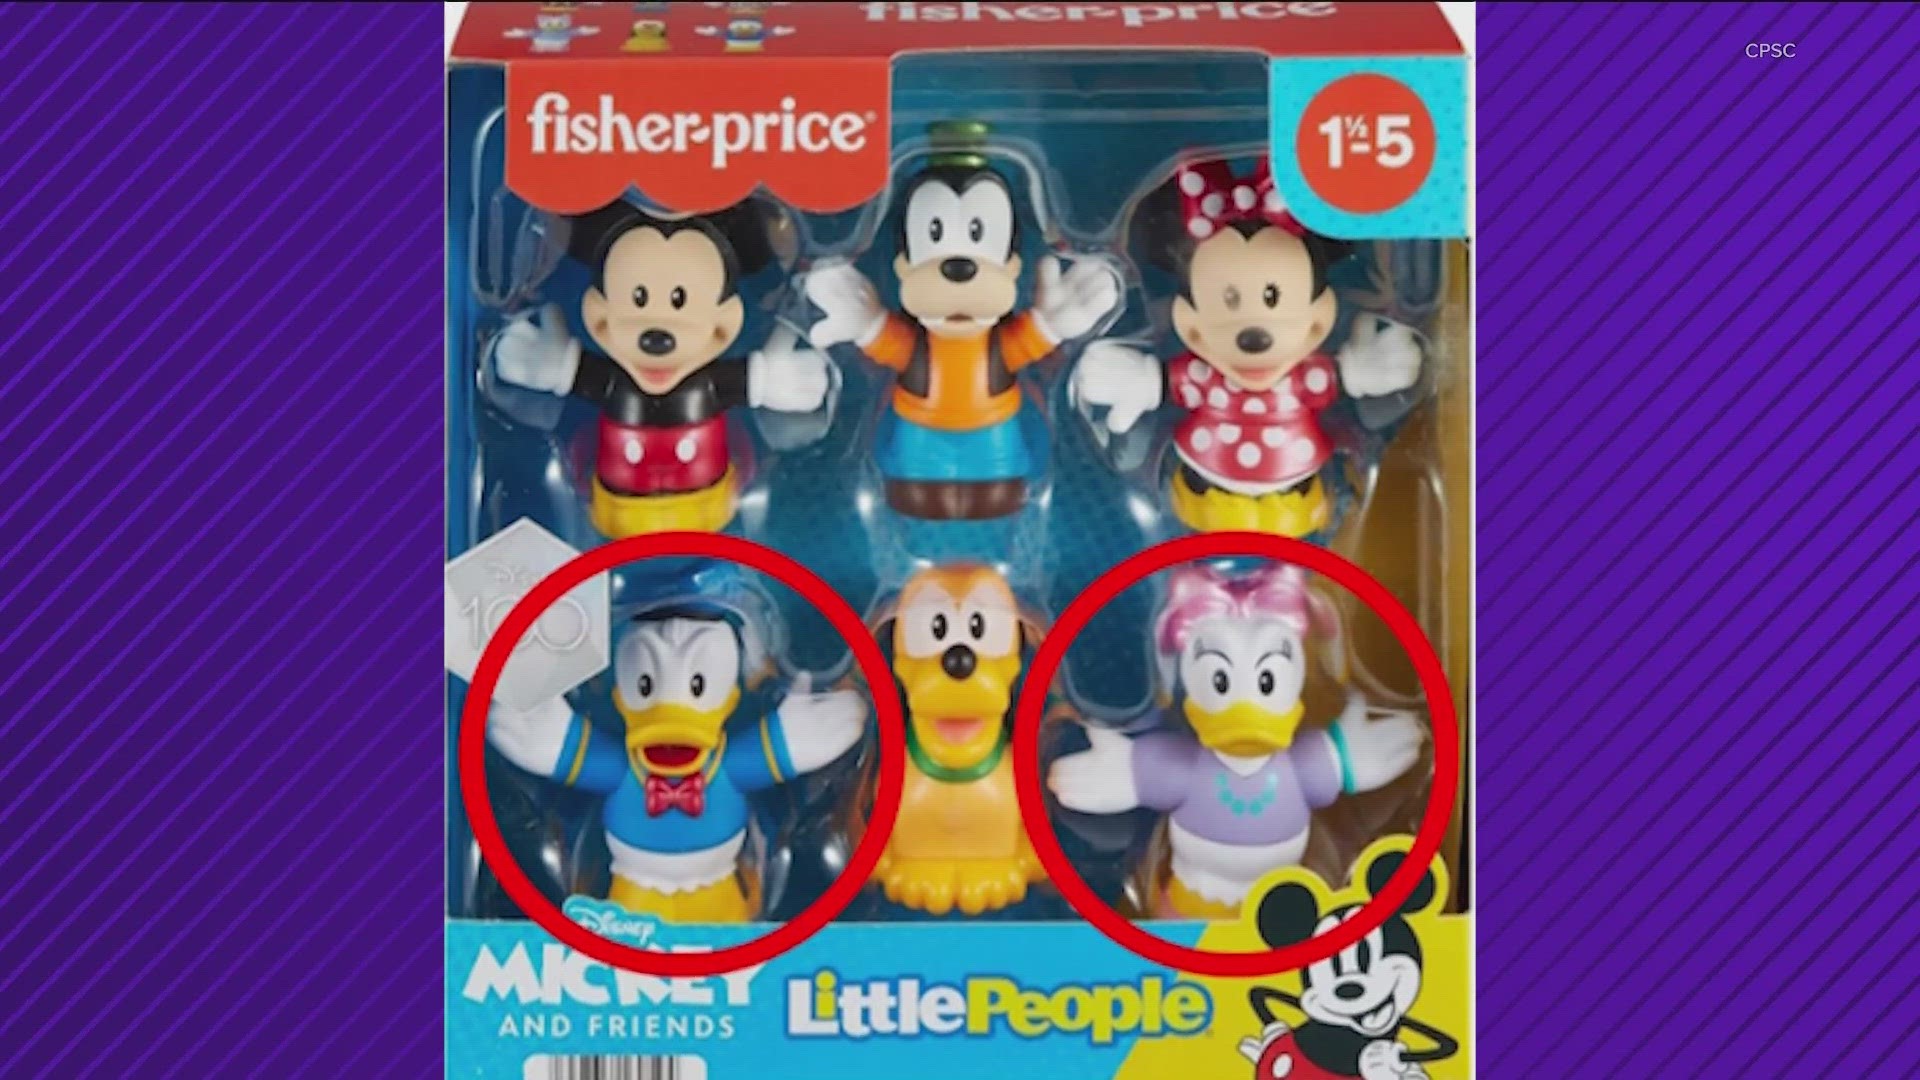 Fisher-Price has recalled more than 200,000 "Mickey Mouse & Friends" figures because of possible choking hazards.